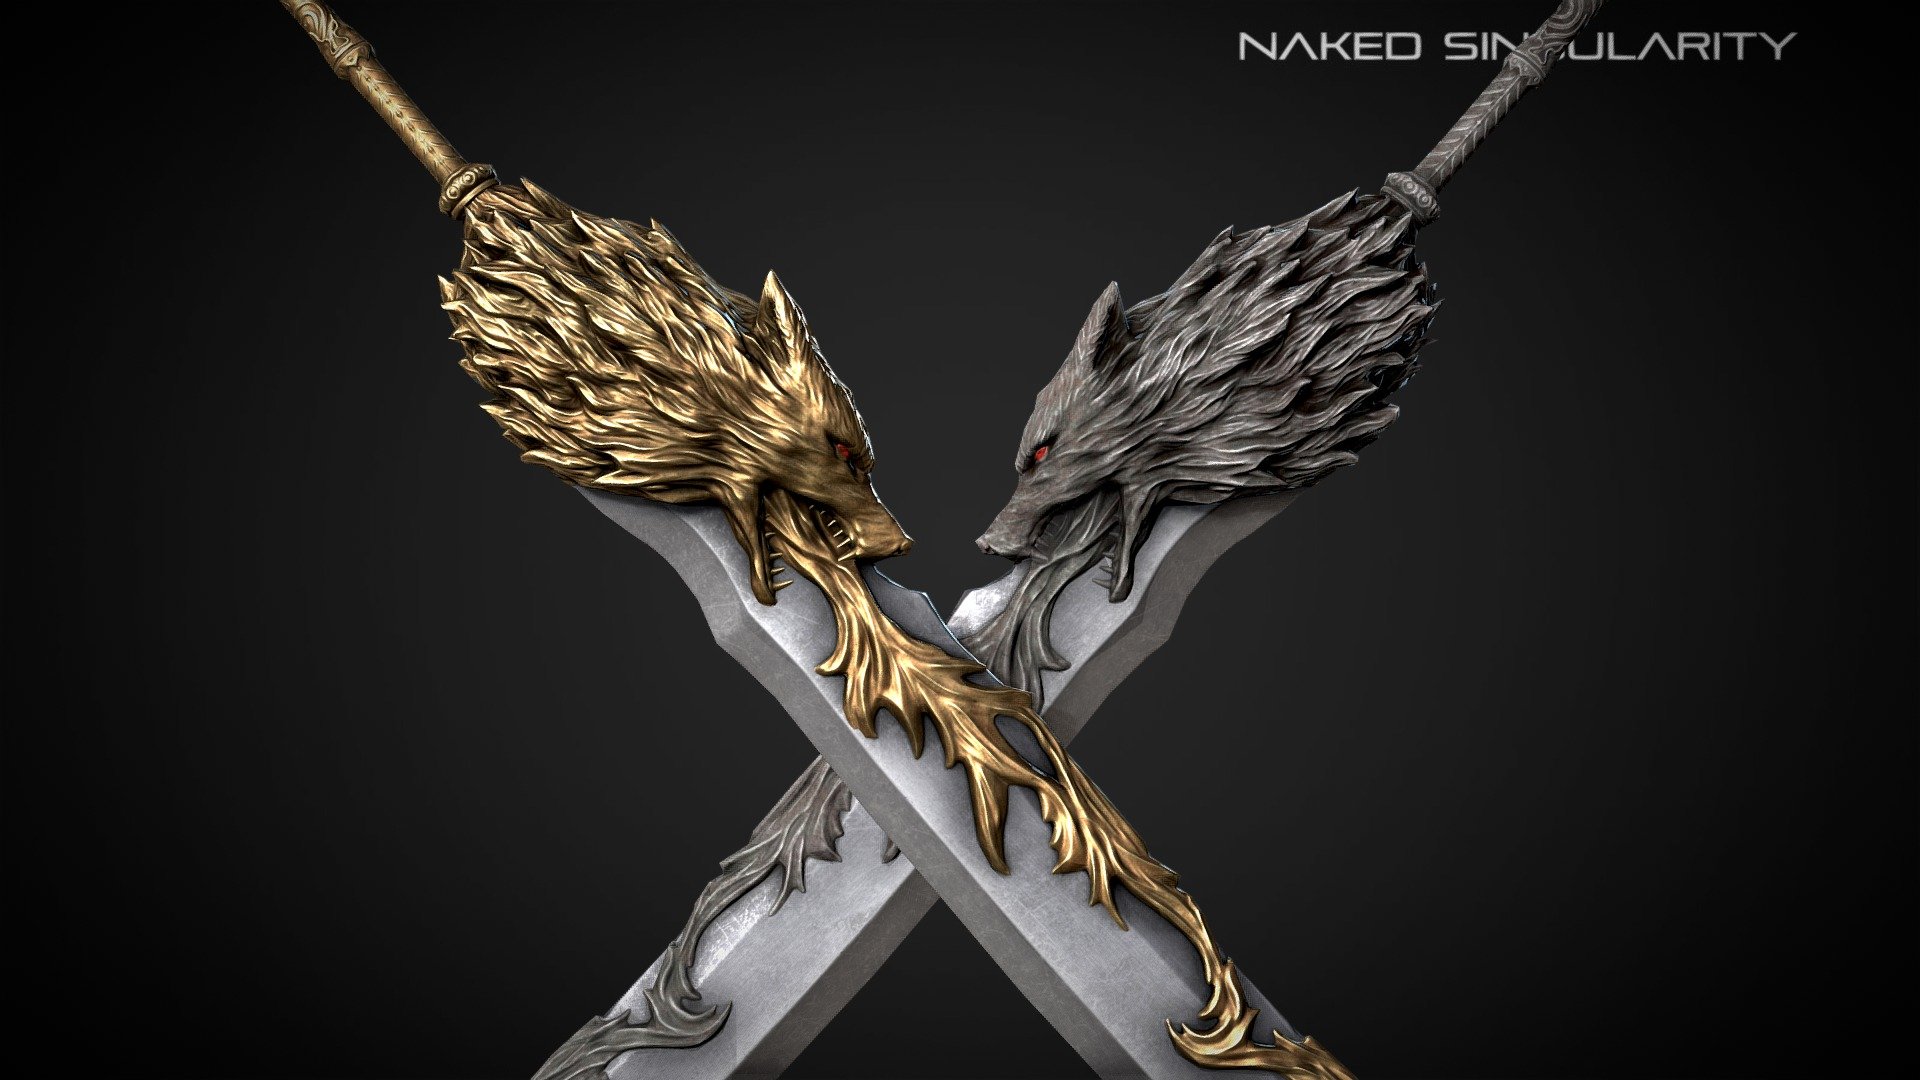 Iron Wolf Sword | Medieval dark fantasy sword | 4K | Lowpoly | PBR

Original concept by Naked Singularity (noAI). Inspire by Dark Souls triology and Elden Ring




2 material options

High quality low poly model.

4K High resolution texture.

Real world scale.

PBR texturing.

Check out other Dark fantasy game asset

Customer support: nakedsingularity.studio@gmail.com

Follow us on: Youtube | Facebook | Instagram | Twitter | Artstation - Iron Wolf Sword | Medieval dark fantasy sword - Buy Royalty Free 3D model by Naked Singularity Studio (@nakedsingularity) 3d model